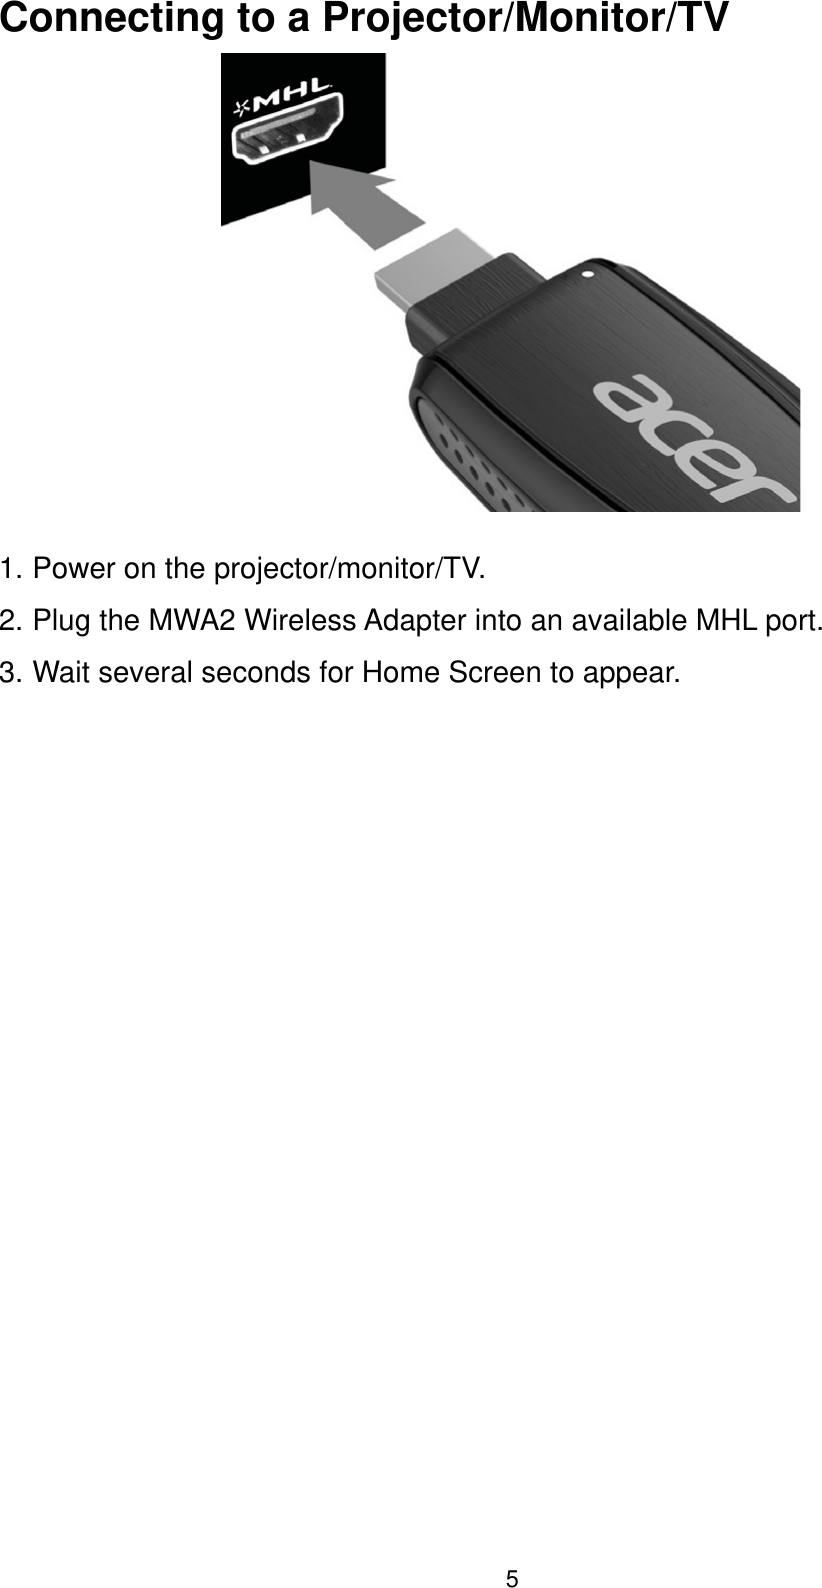 5Connecting to a Projector/Monitor/TV1. Power on the projector/monitor/TV.2. Plug the MWA2 Wireless Adapter into an available MHL port.3. Wait several seconds for Home Screen to appear.